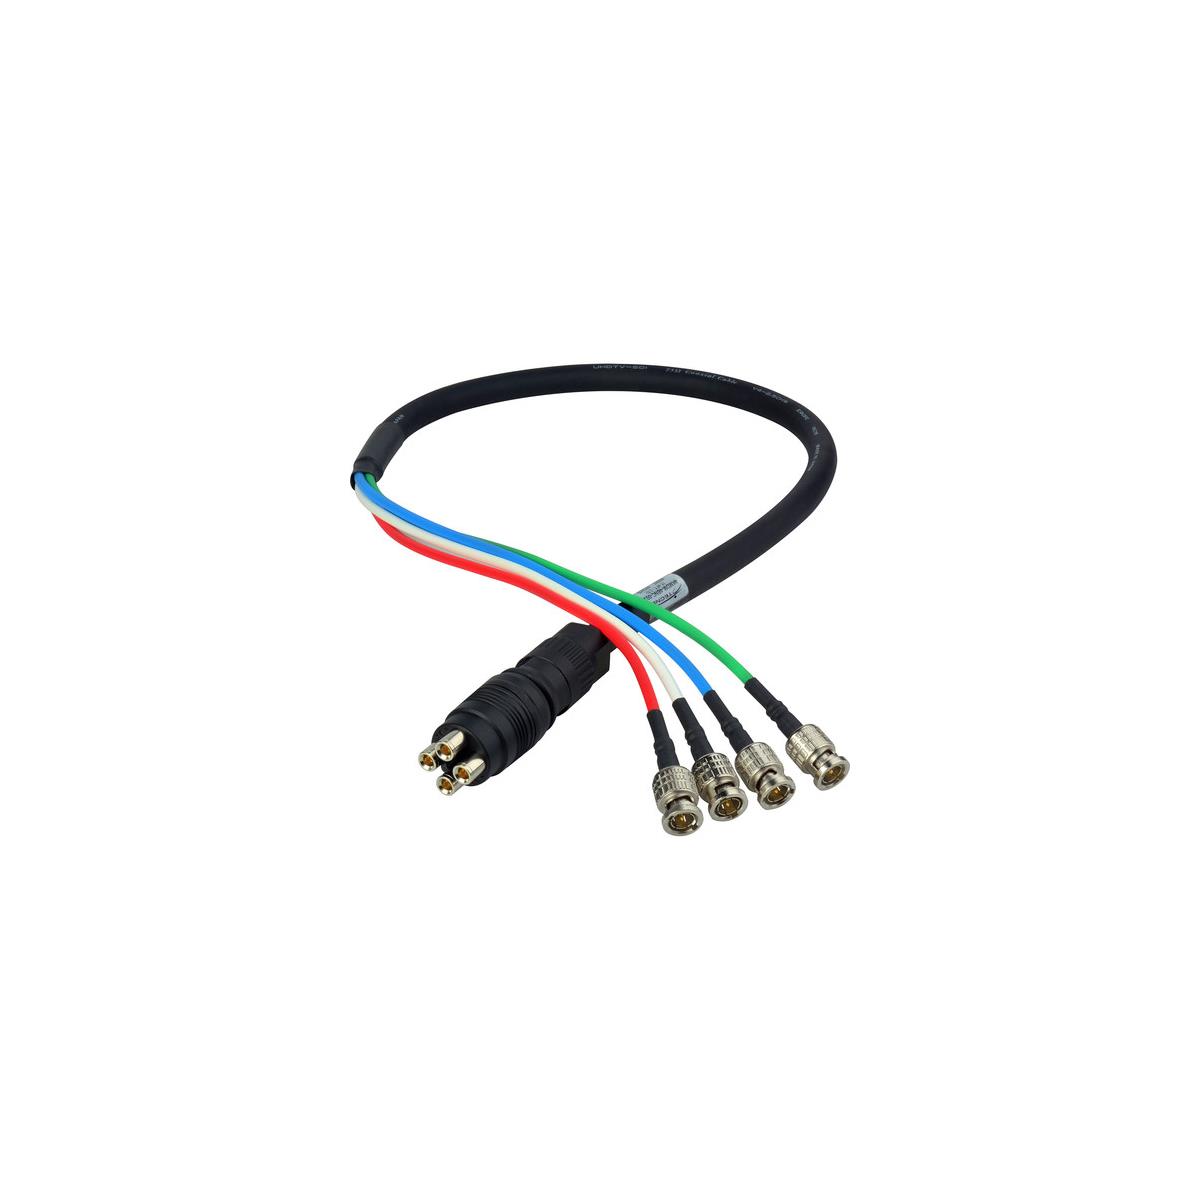 Laird 75' 4K UHD 3G HD-SDI 4-Channel DIN Male to BNC Camera Breakout Cable <b> 4-3G HD-SDI Signal Channel Quick Connect System for 4K/UHD Video Formats </b>One step, quick-connect Laird coax Canare cable assemblies connect 4 channels of 3G HD-SDI signals for 4K/UHD video formats. The Laird cables are assembled with Canare 4 channel, V4-2.5CHW flexible coaxial cable, allowing a break out to 4 Canare BNC or 4 DIN connectors. The Canare male connector, MDM-V4C25HW is designed to mate with the MDF-V4JRU panel mount receptacle which features a 4 DIN pass-through on the back side to increase your connectivity but not your rack space. Laird 4K UHD Canare camera cables assemblies make quick work of keeping everything in line and organized. Available in a variety of lengths. Use with the Canare MDF-V4JRU 4K DIN 1.0/2.3 4-channel chassis mount connector.• Quick connect and disconnect• Multiple 3G-SDI signals to 4K/UHD formats• Canare cable with solid and lightweight nylon resin body• Push-pull locking Canare coax connectors with protective rubber boots• High performance Canare BCP-B25HW BNC or 4 DCP-C25HD DIN connectors• Made in the USA in a Canare trained fiber shop• Canare V4-2.5CHW 4-Channel 4K 75Ohms Coaxial Cable• 4 DIN 1.0/2.3 connectors• MDF-V4JRU accepts MDM-V4C25HW and also DIN 1.0/2.3 plugs<b> Applications </b>• High density 3G-SDI• applications• Mobile trucks• Fly packs• Studios• 4K transmission• Consolidate HD-SDI lines